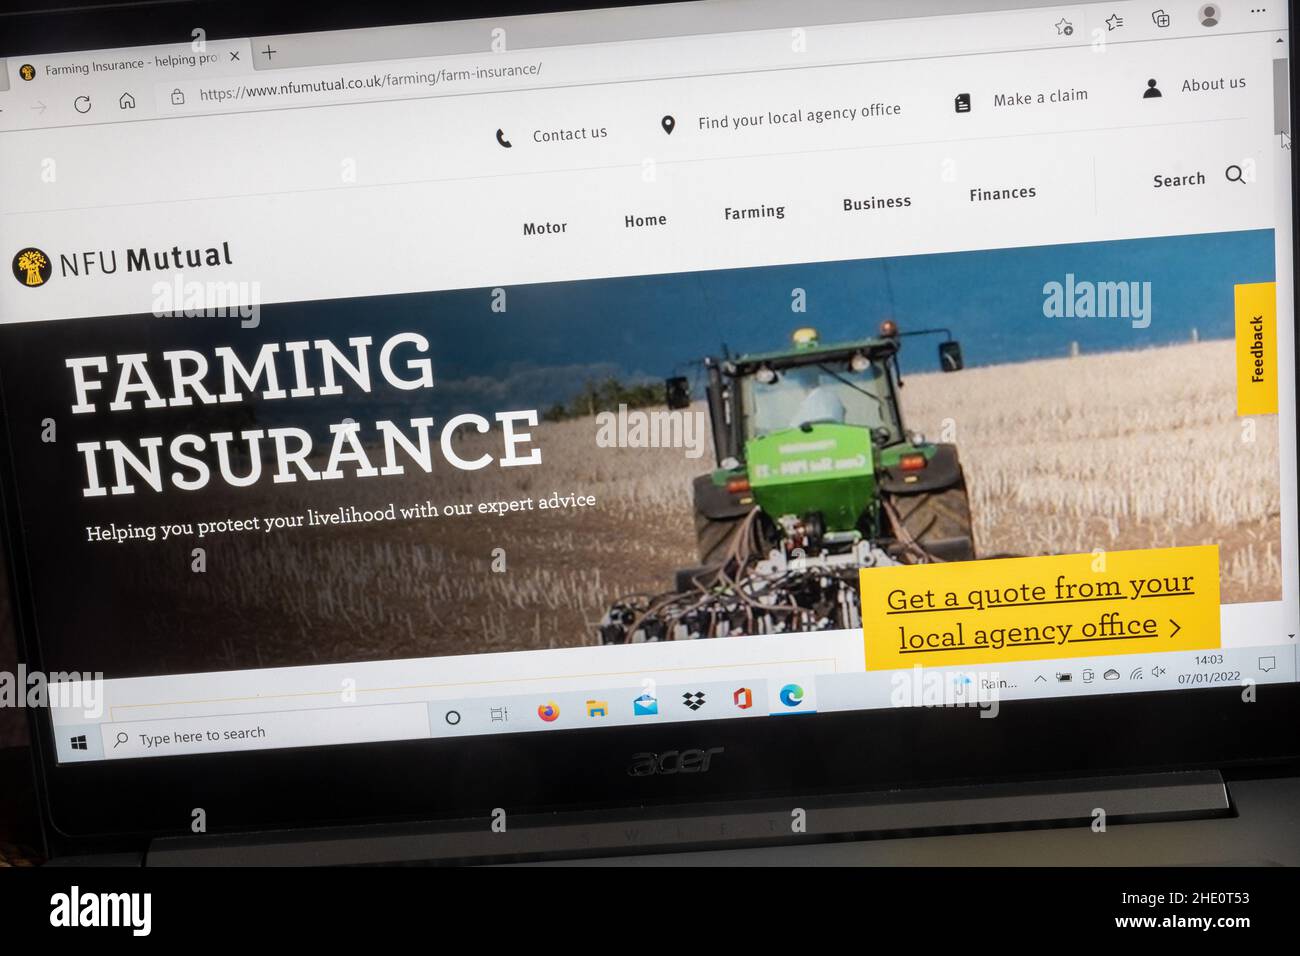 NFU Mutual Insurance company website on a laptop computer, UK. Farming insurance page - protect your livelihood. Stock Photo